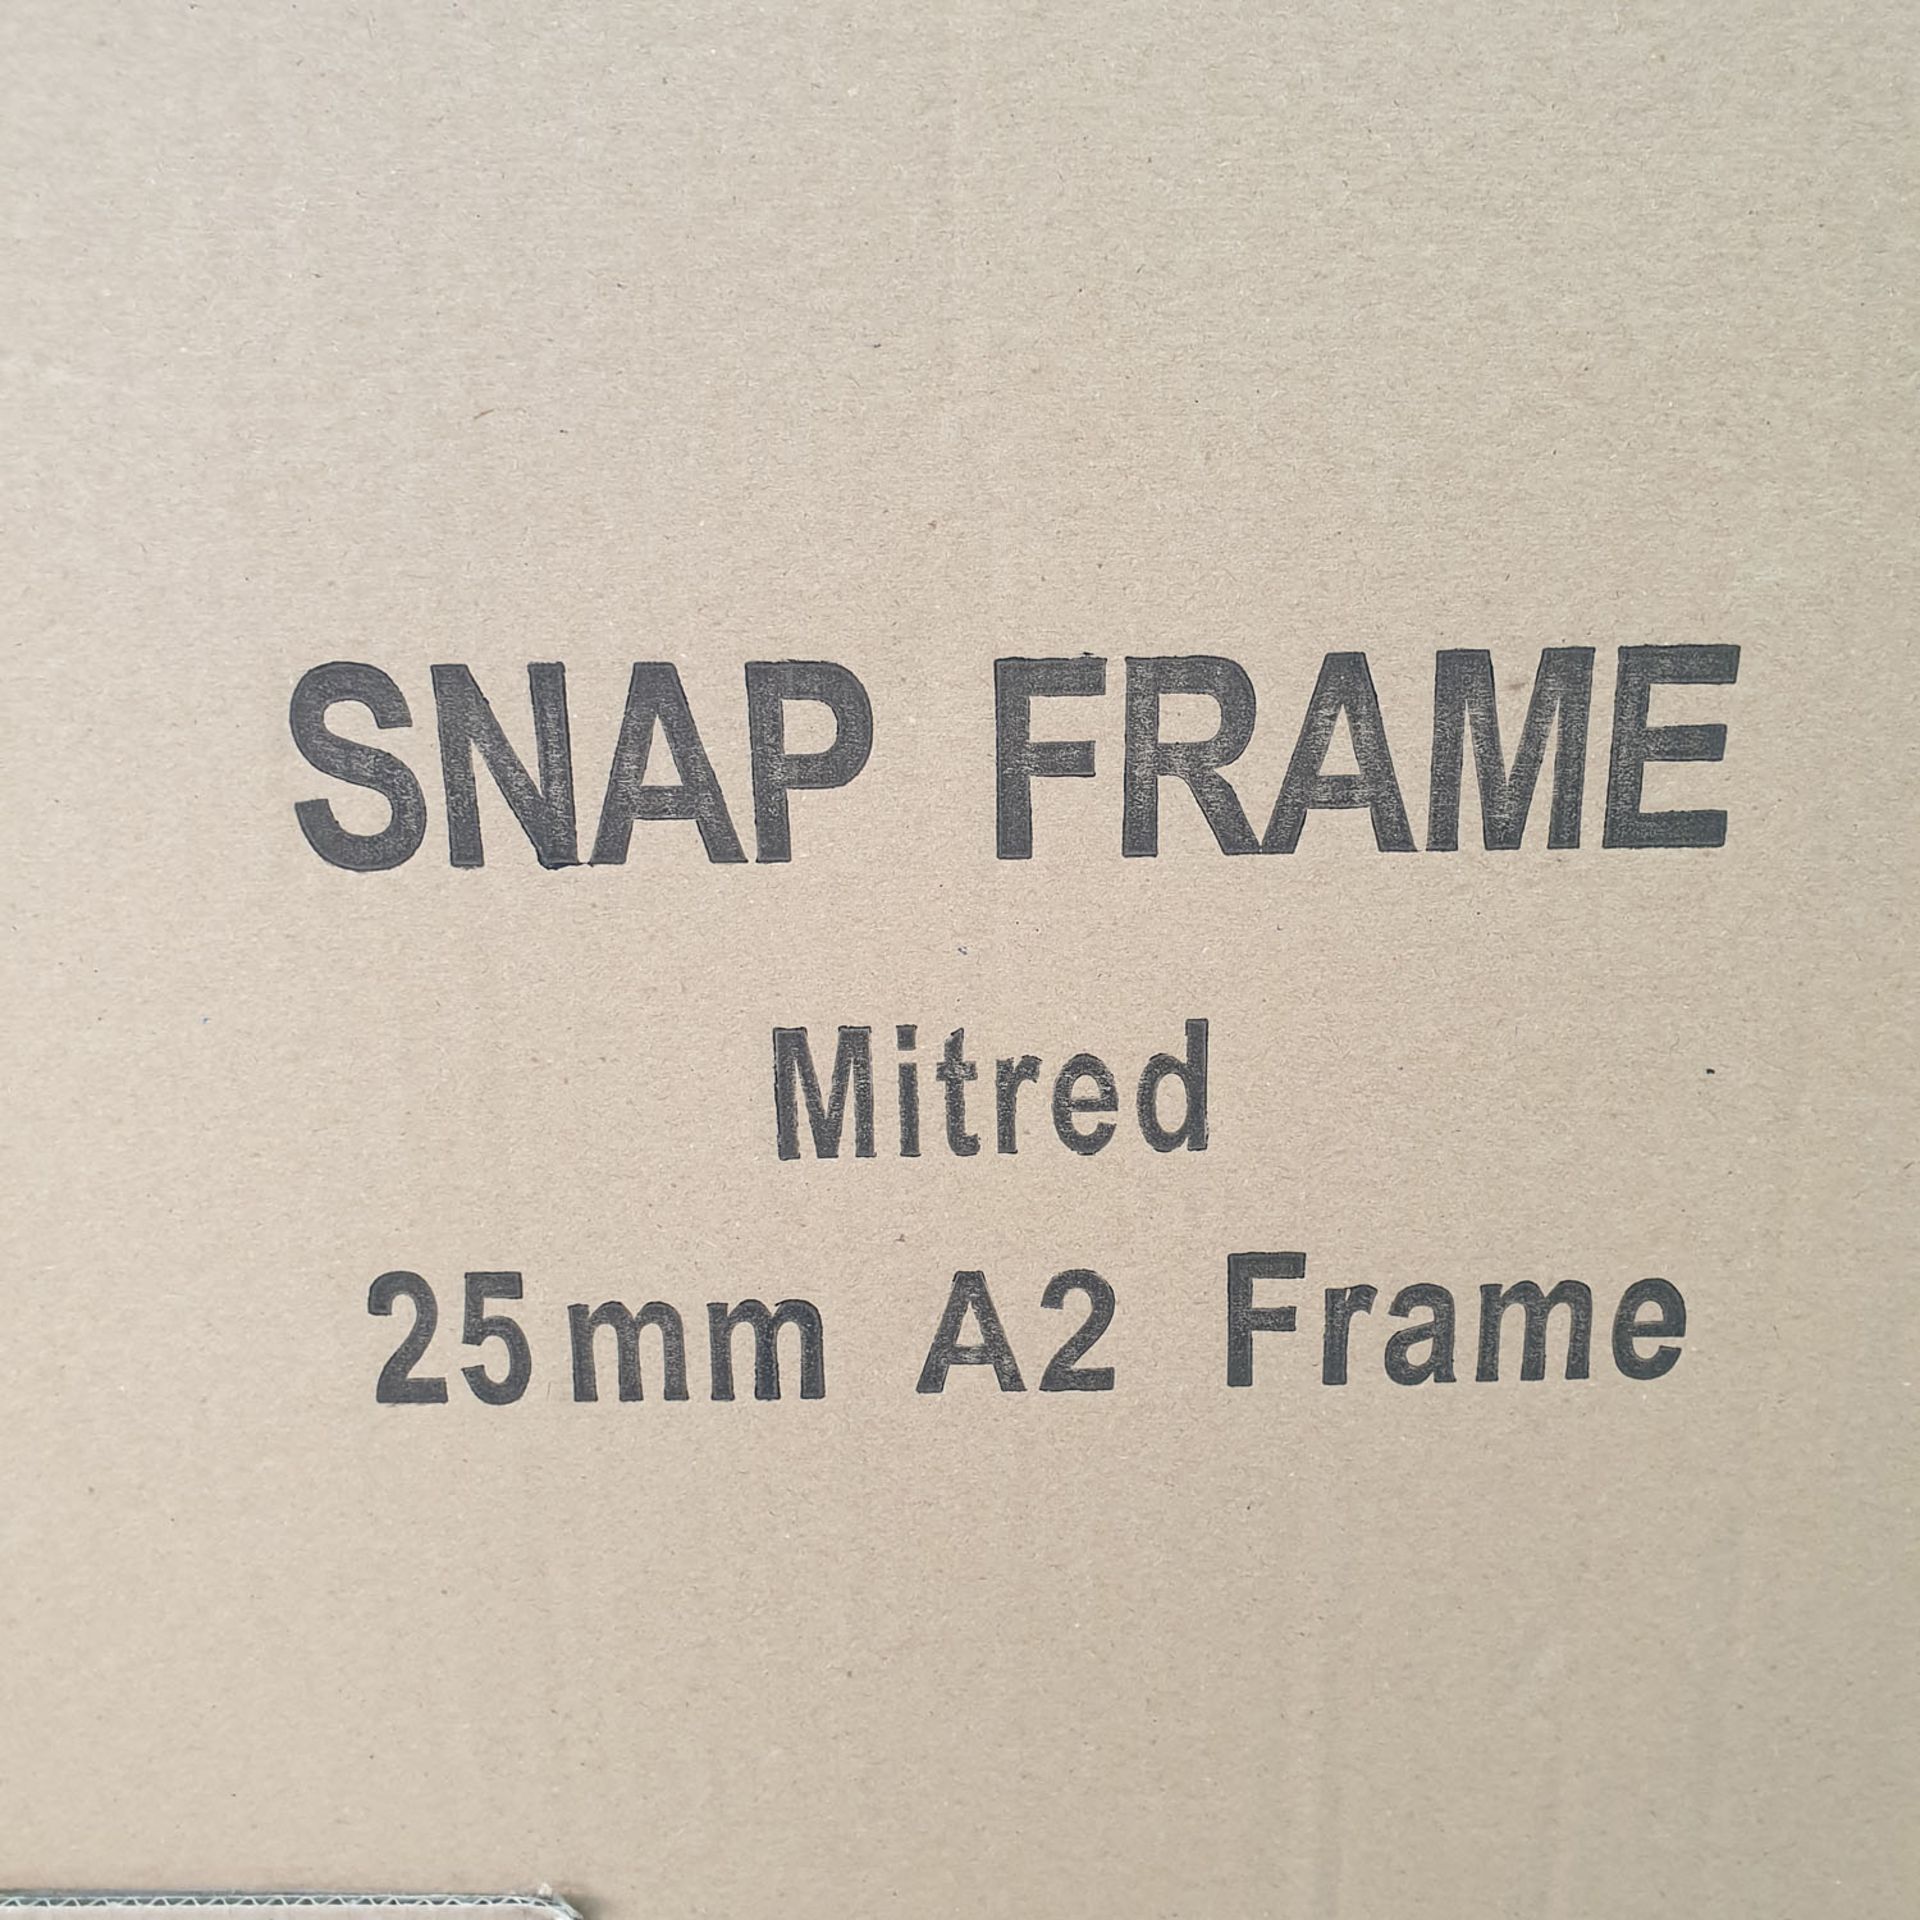 160 x Snap Frame Mitred 25mm A2 Frame - Image 4 of 9